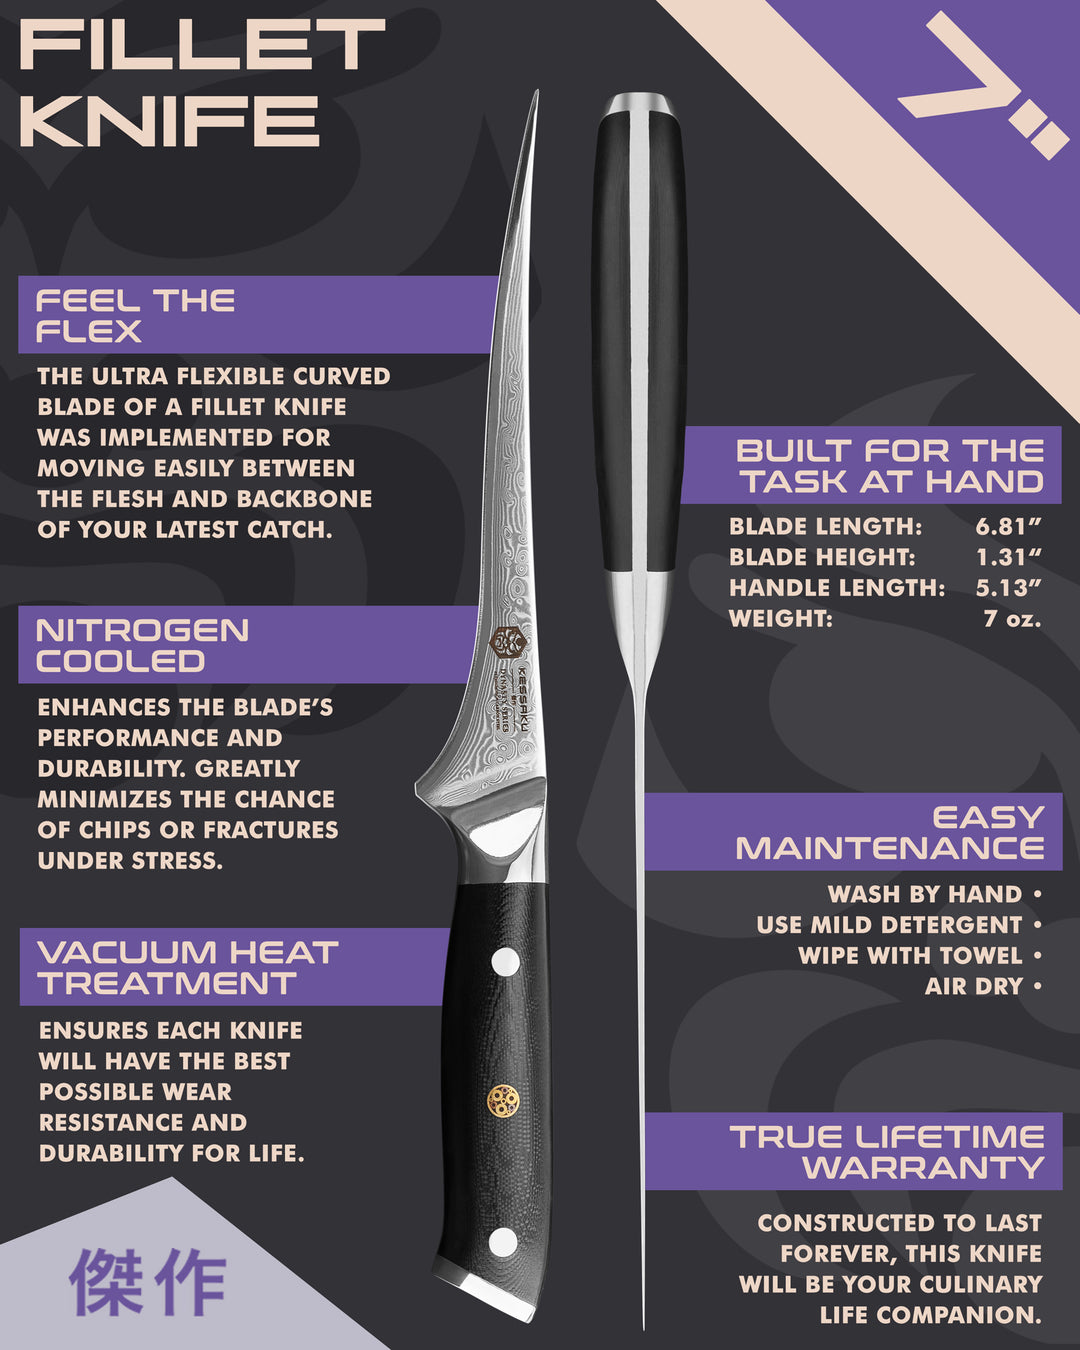 Kessaku Dynasty Damascus Fillet Knife uses, dimensions, maintenance, warranty info, and additional blade treatments